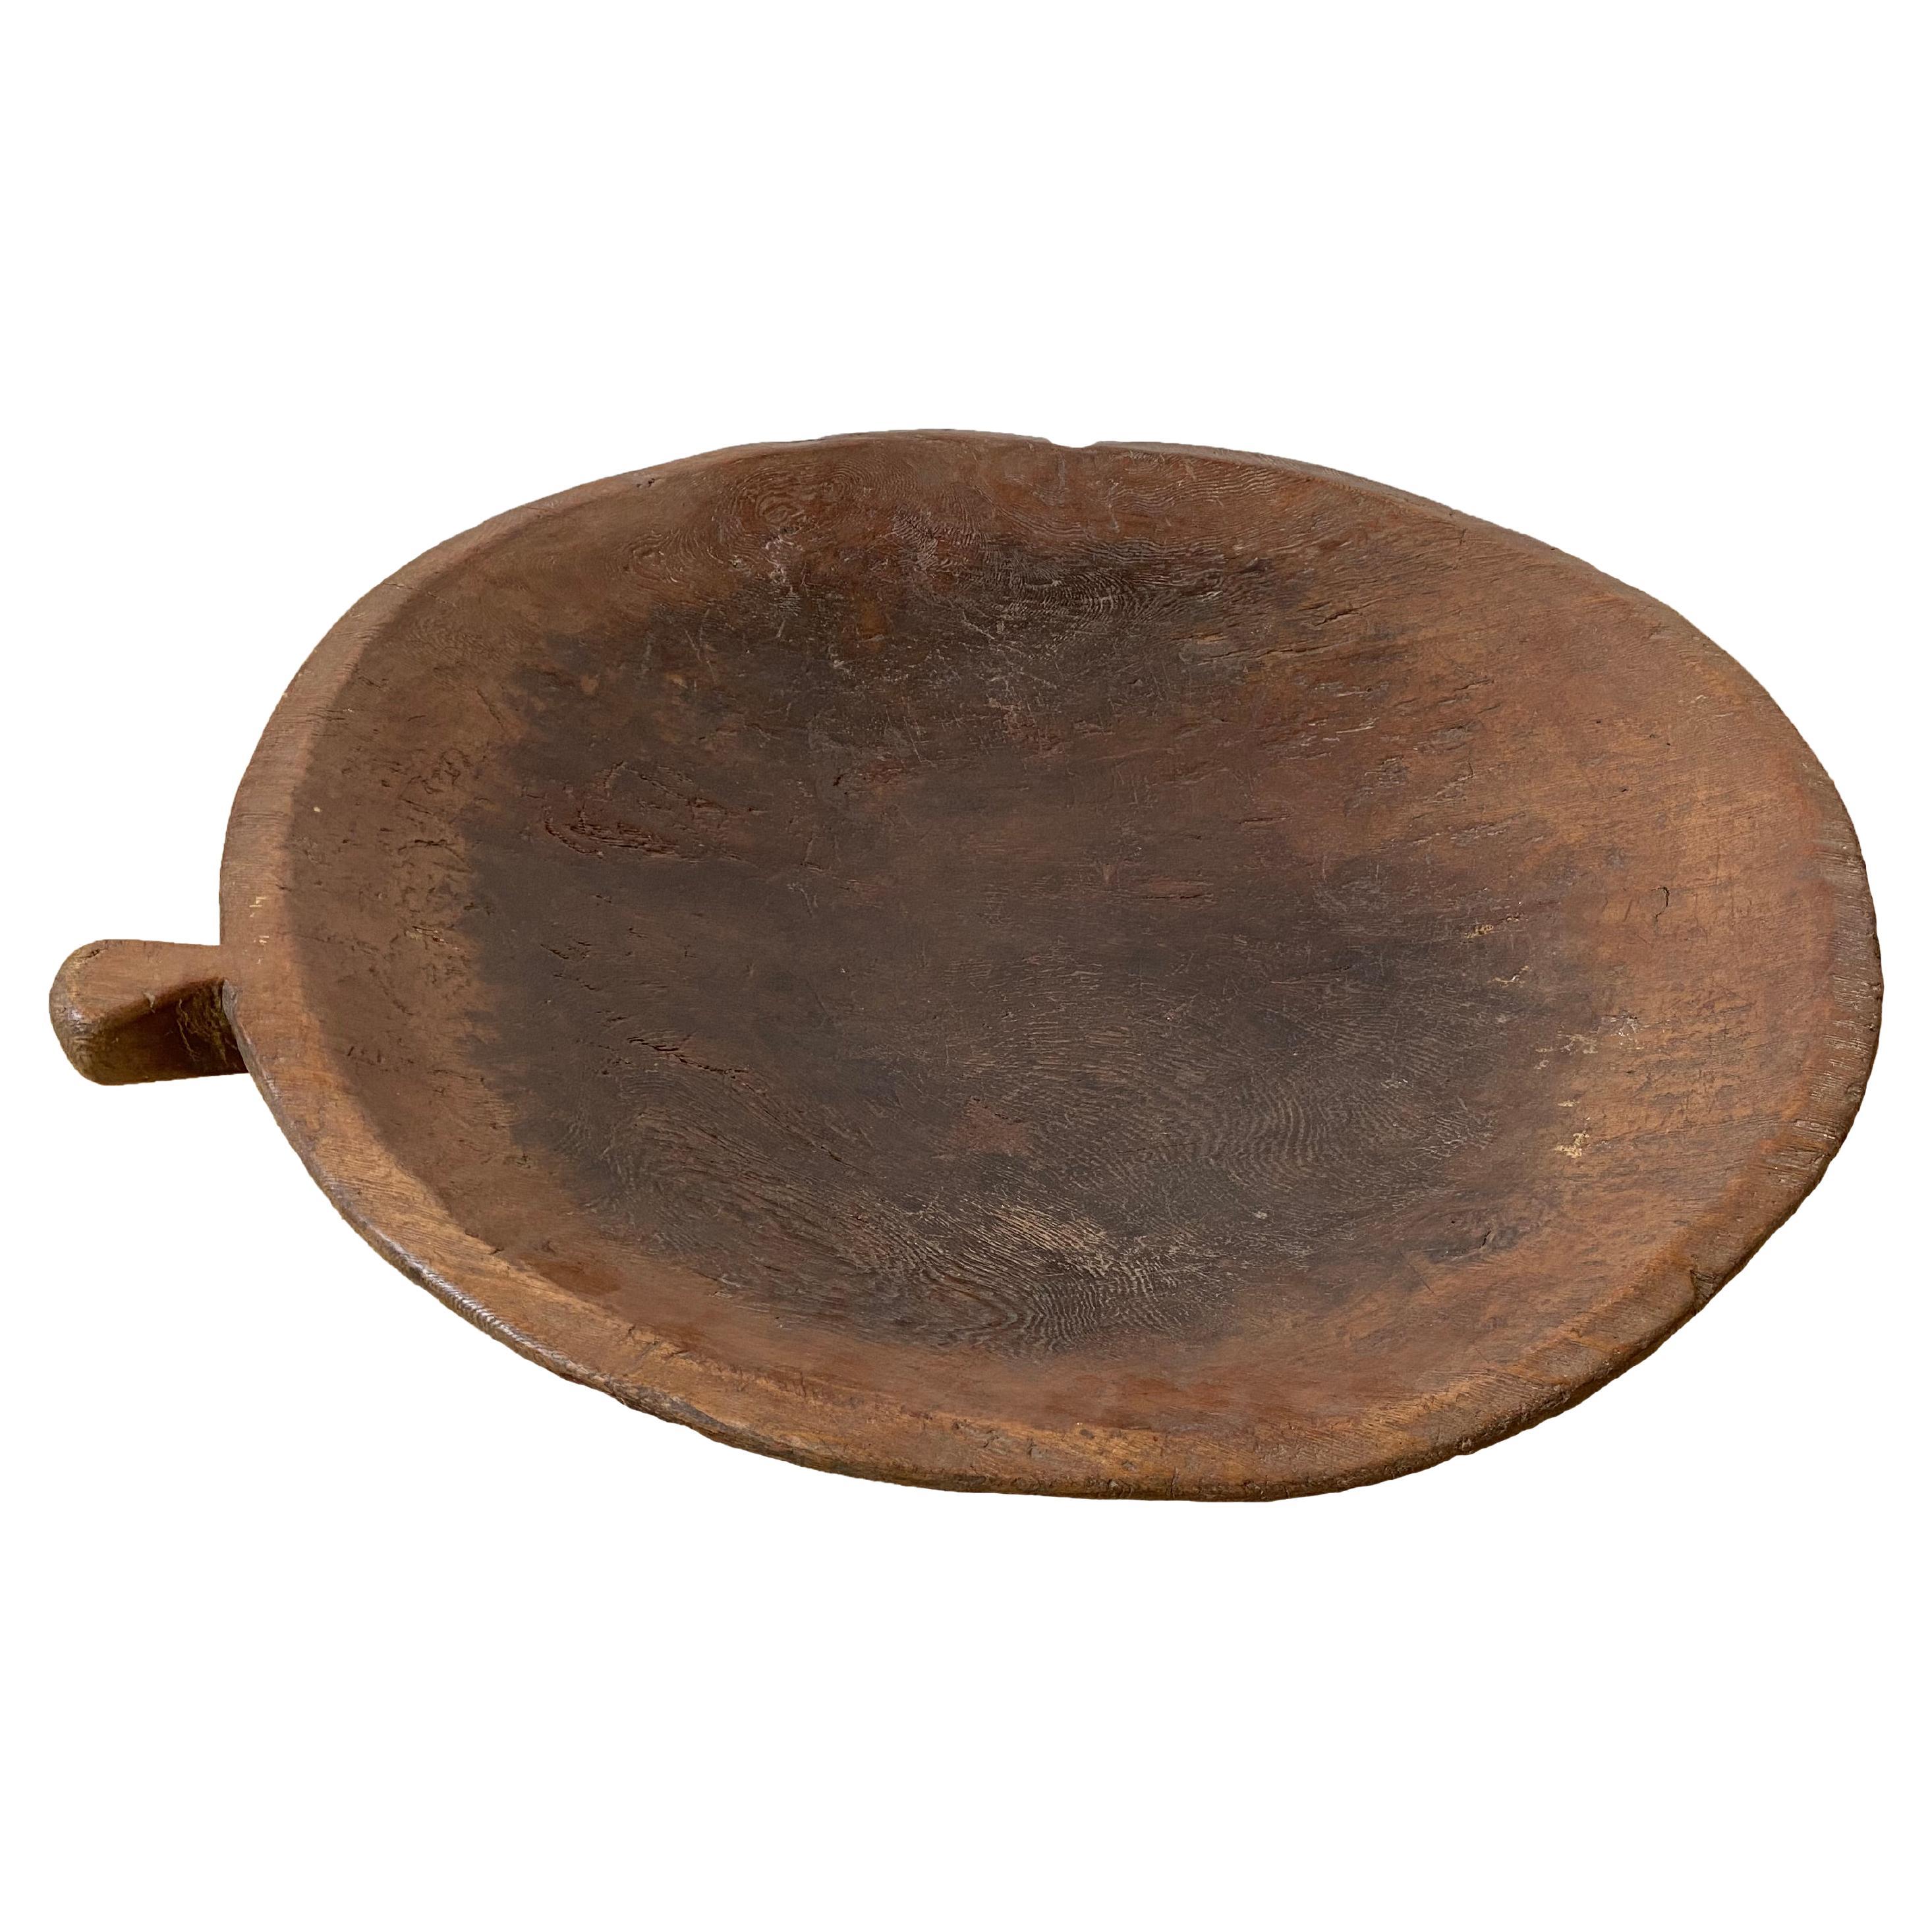 Fruitwood Bowl from Timor Island, Indonesia, Early 20th Century